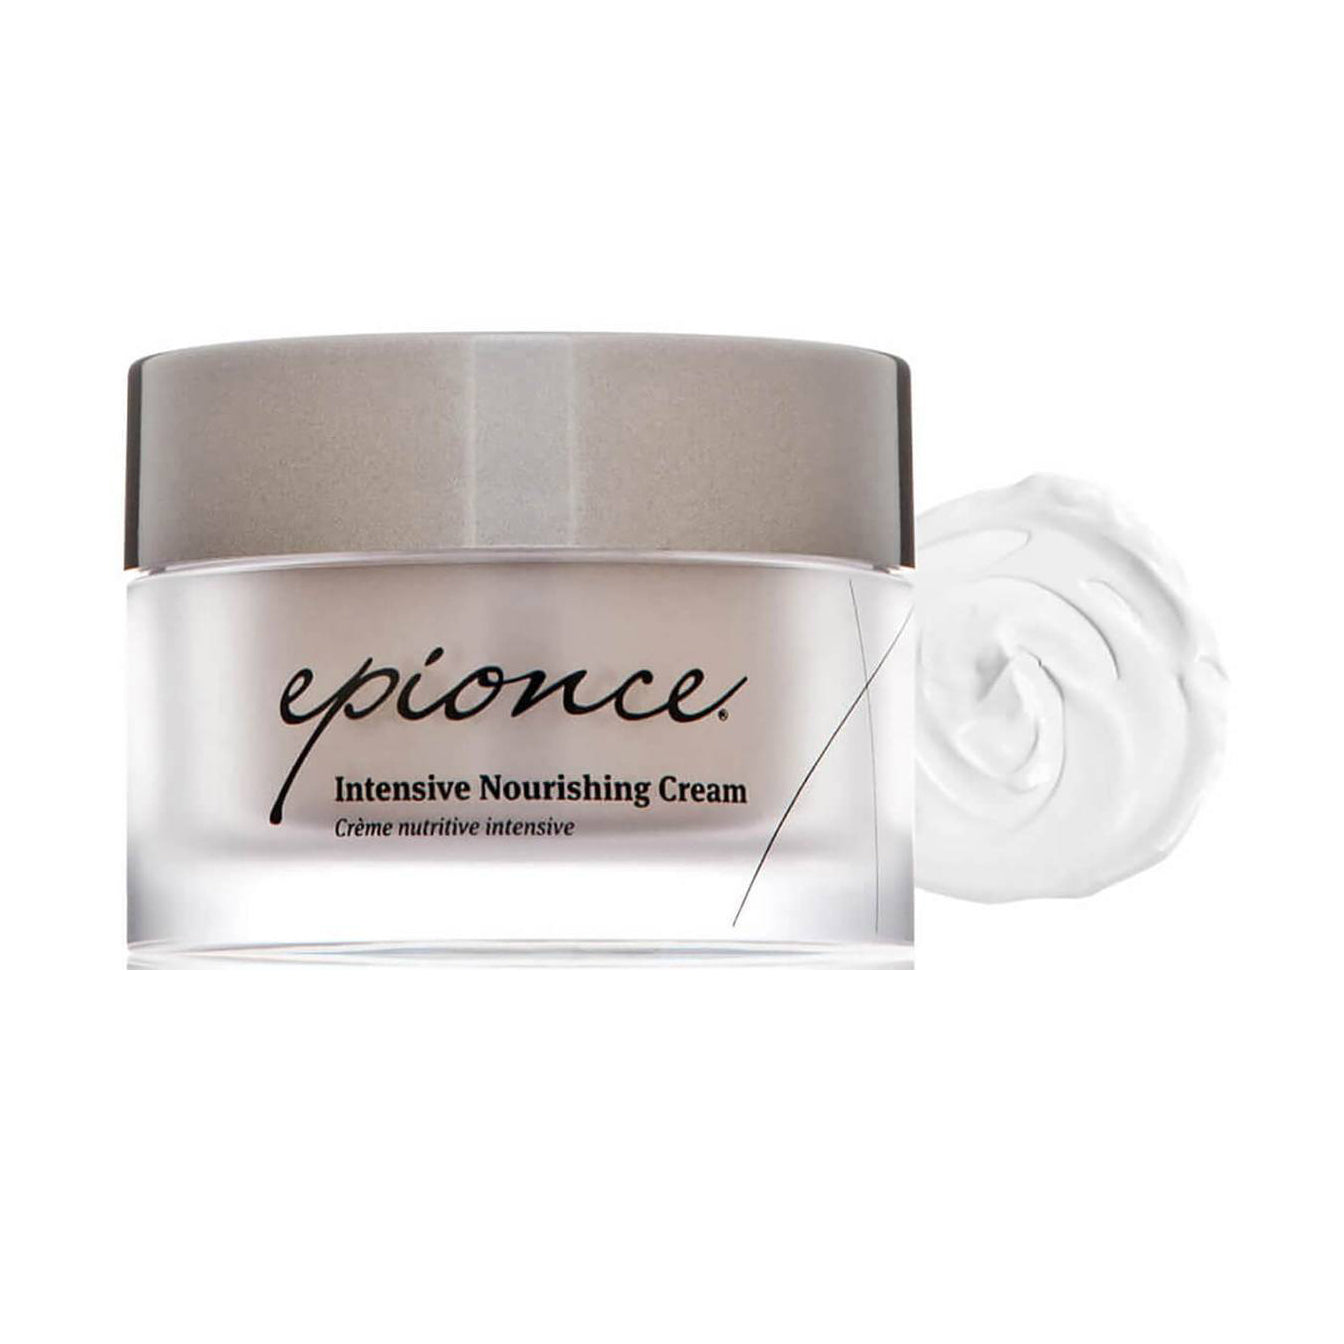 Epionce Intensive Nourishing Cream from MyExceptionalSkinCare.com Texture